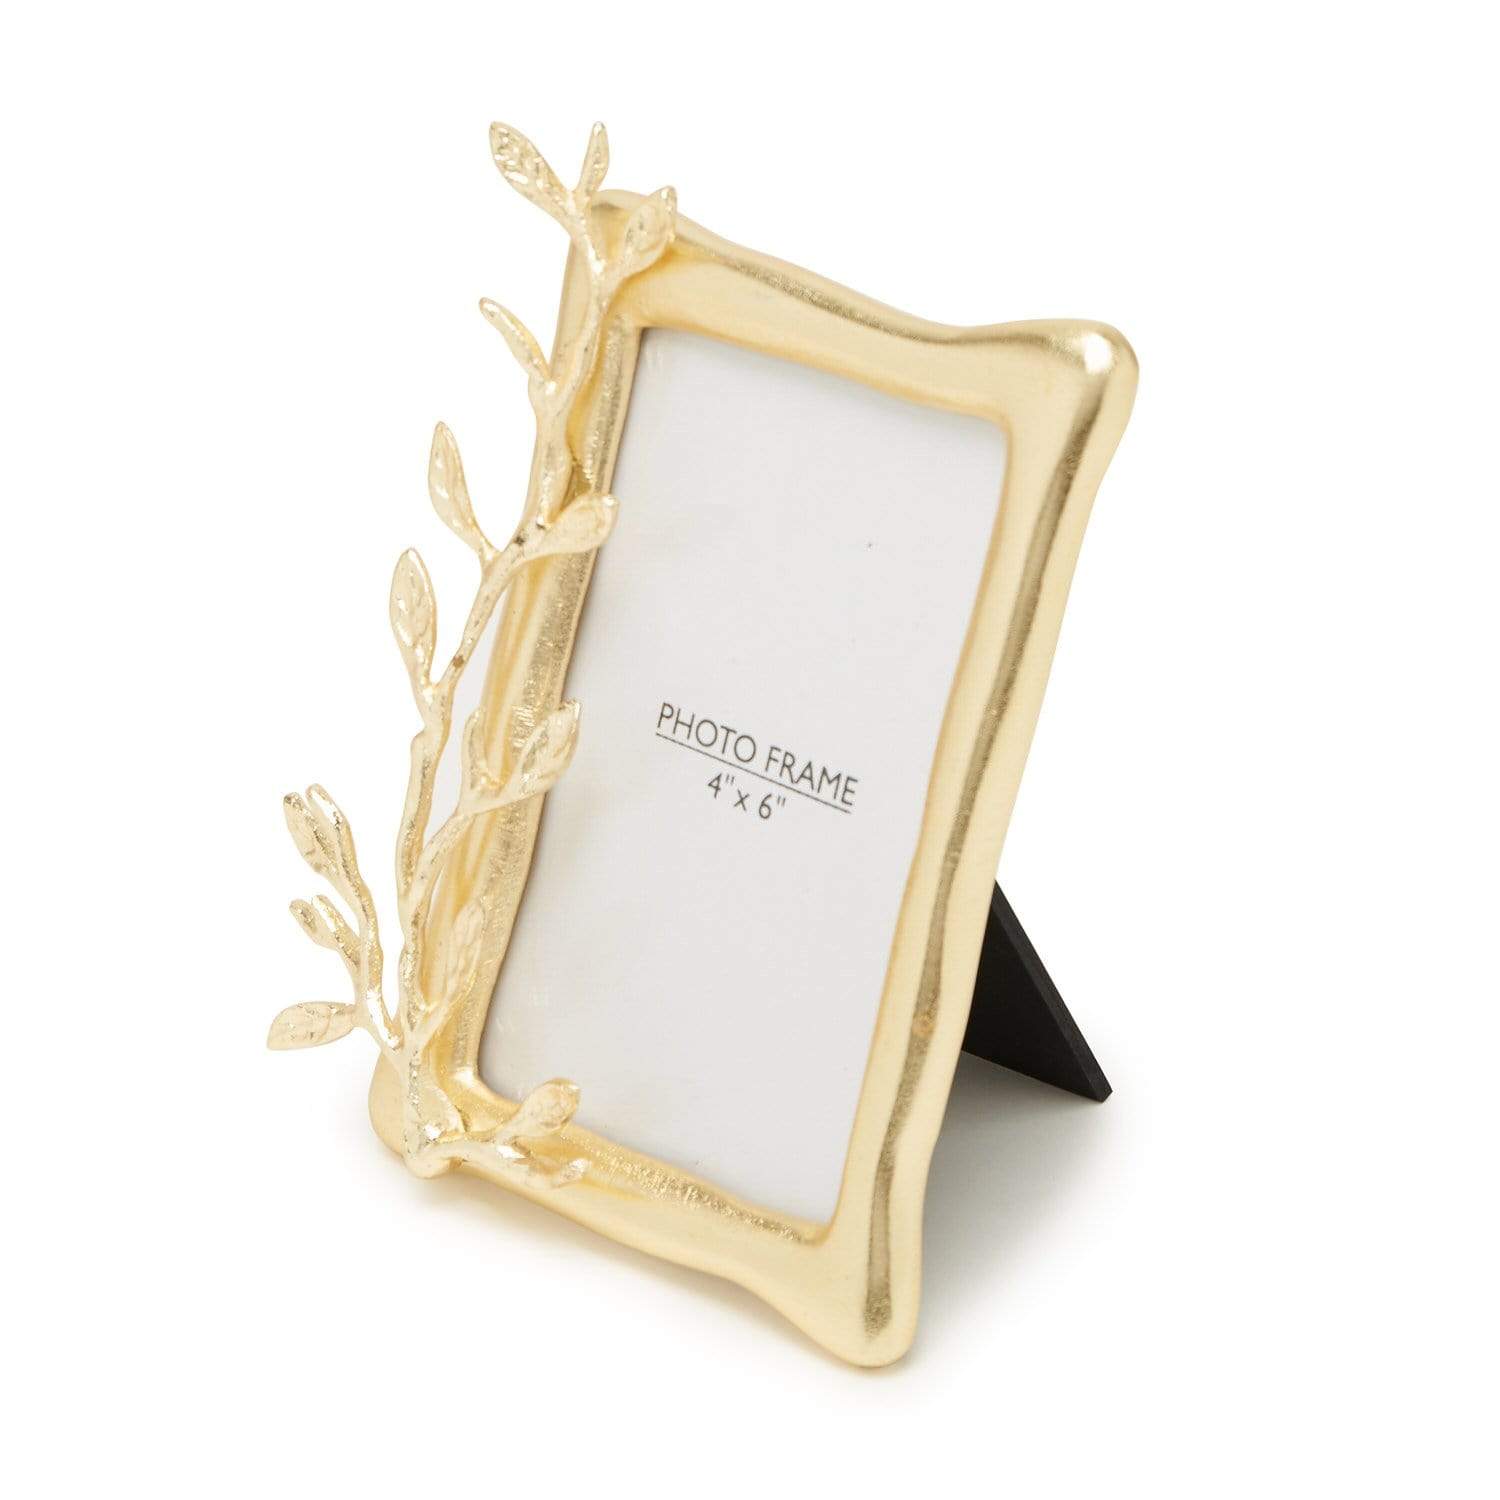 BIRCH PHOTO FRAME 4X6IN GOLD FINISHED BRASS AND ALUM - 1218305S